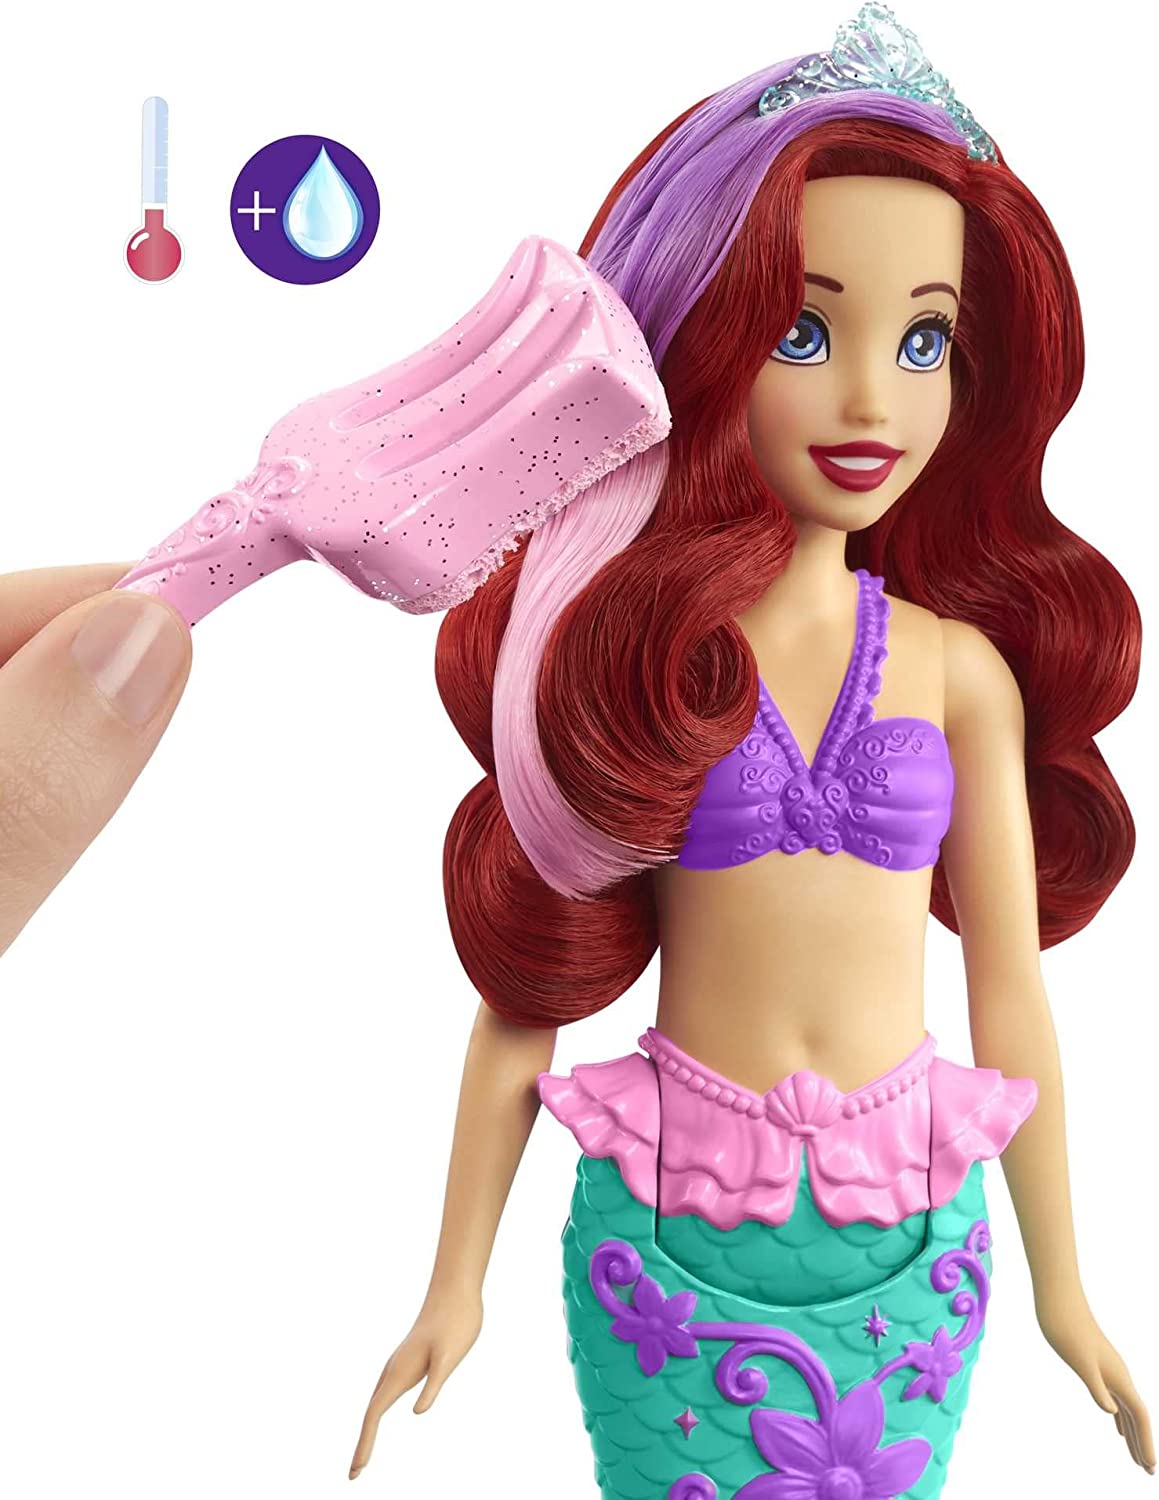 Ariel Mermaid Doll with Colour Changing Hair and Tail Fin | Barbie